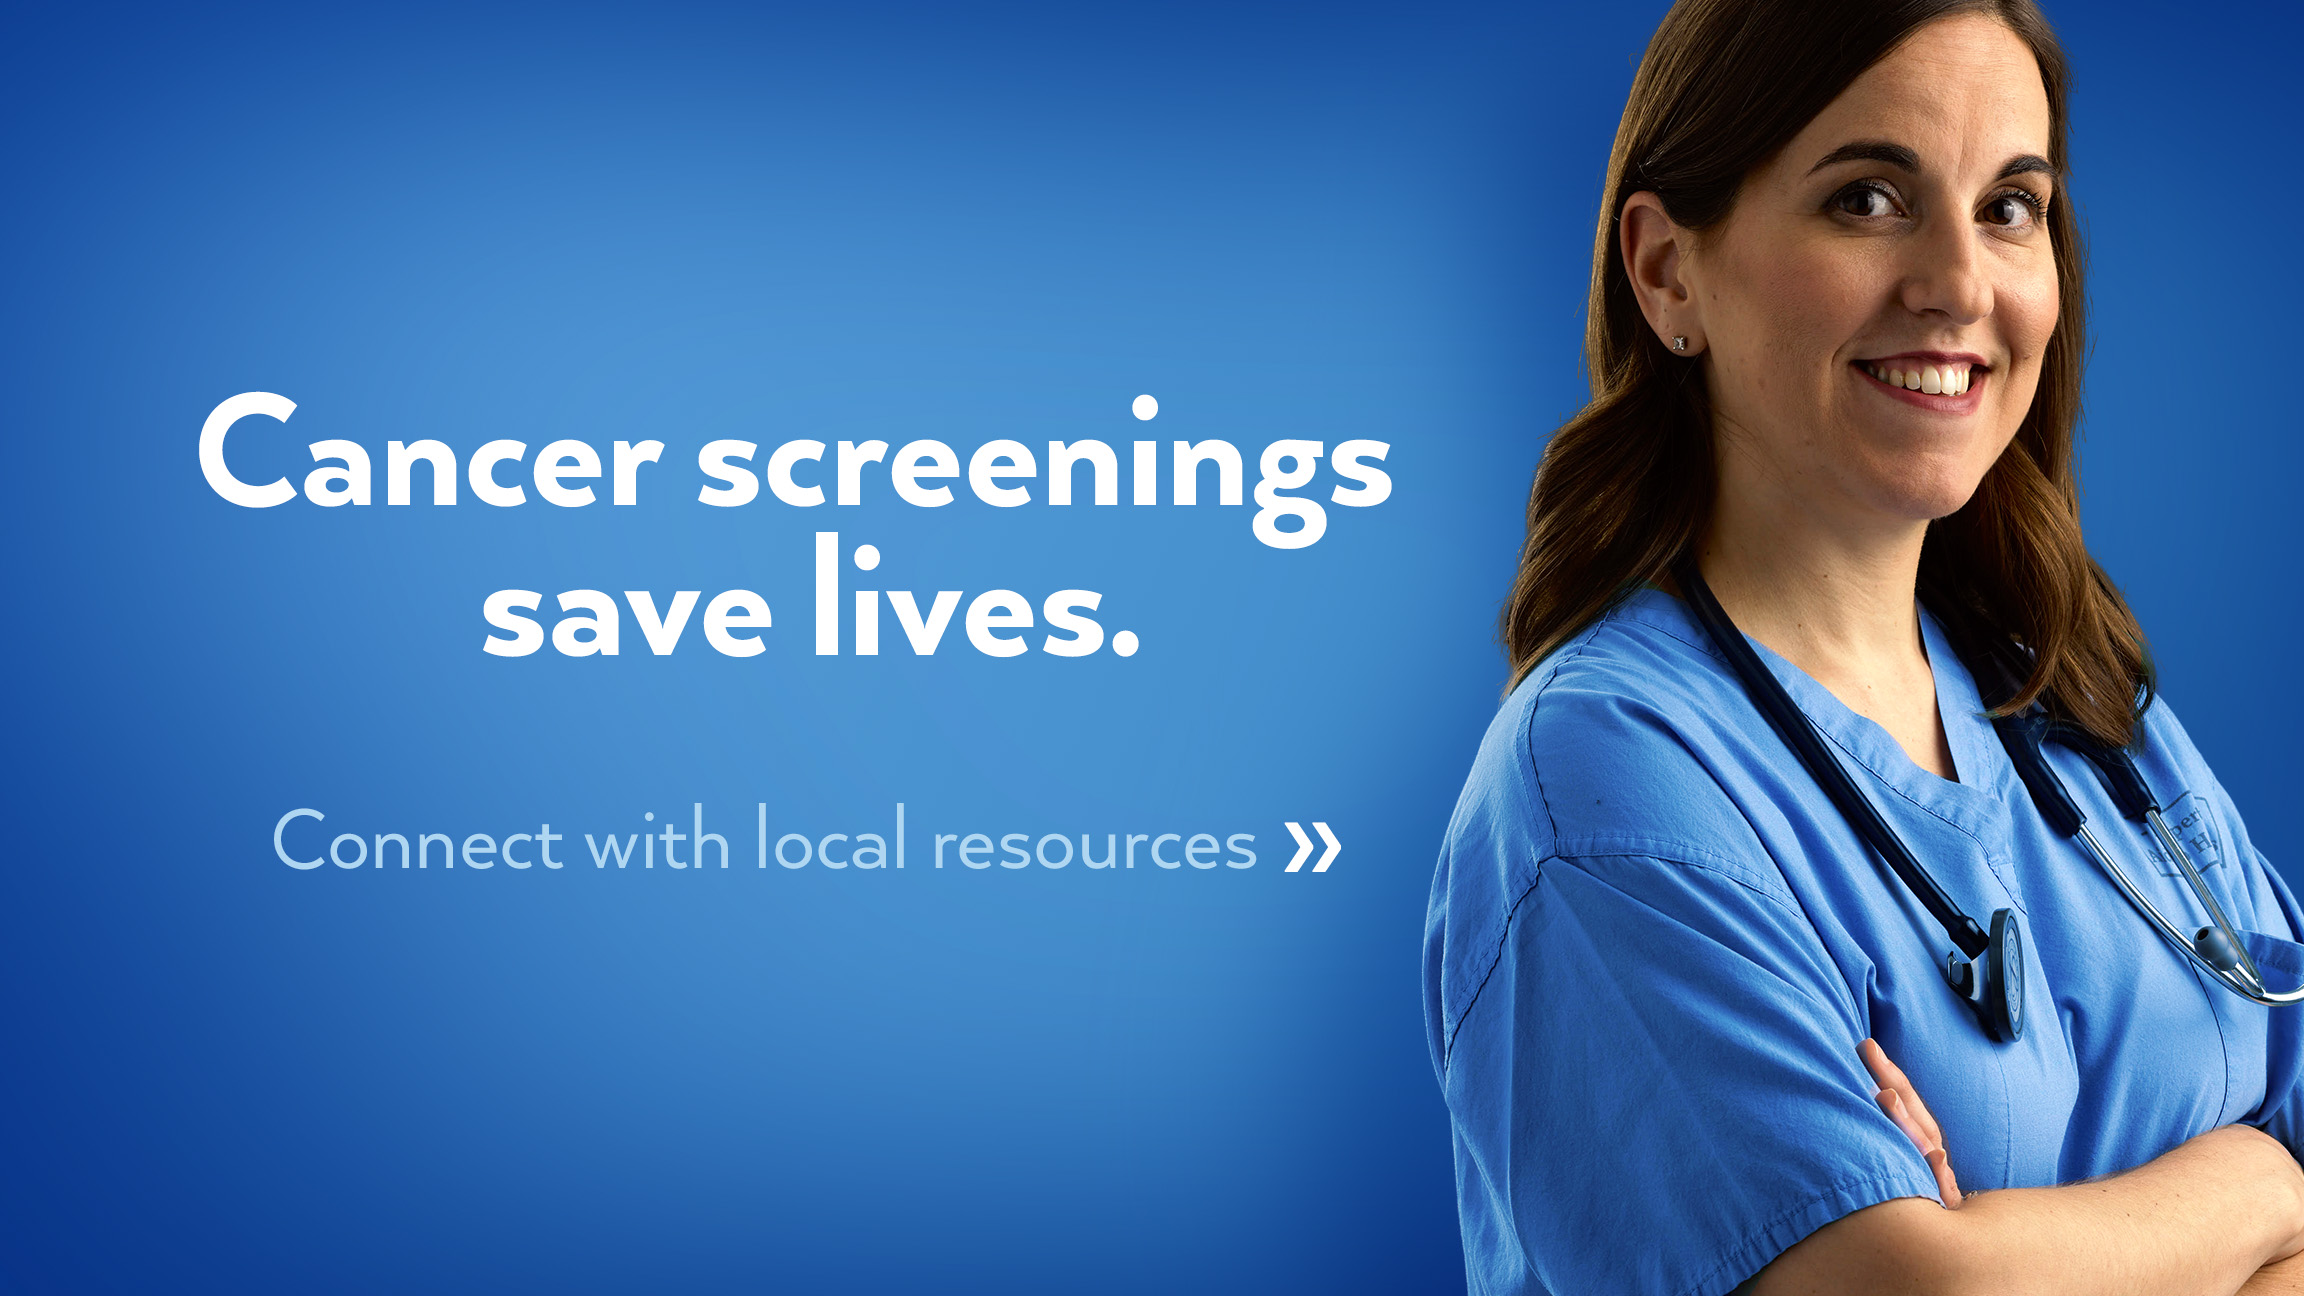 Cancer screenings save lives.